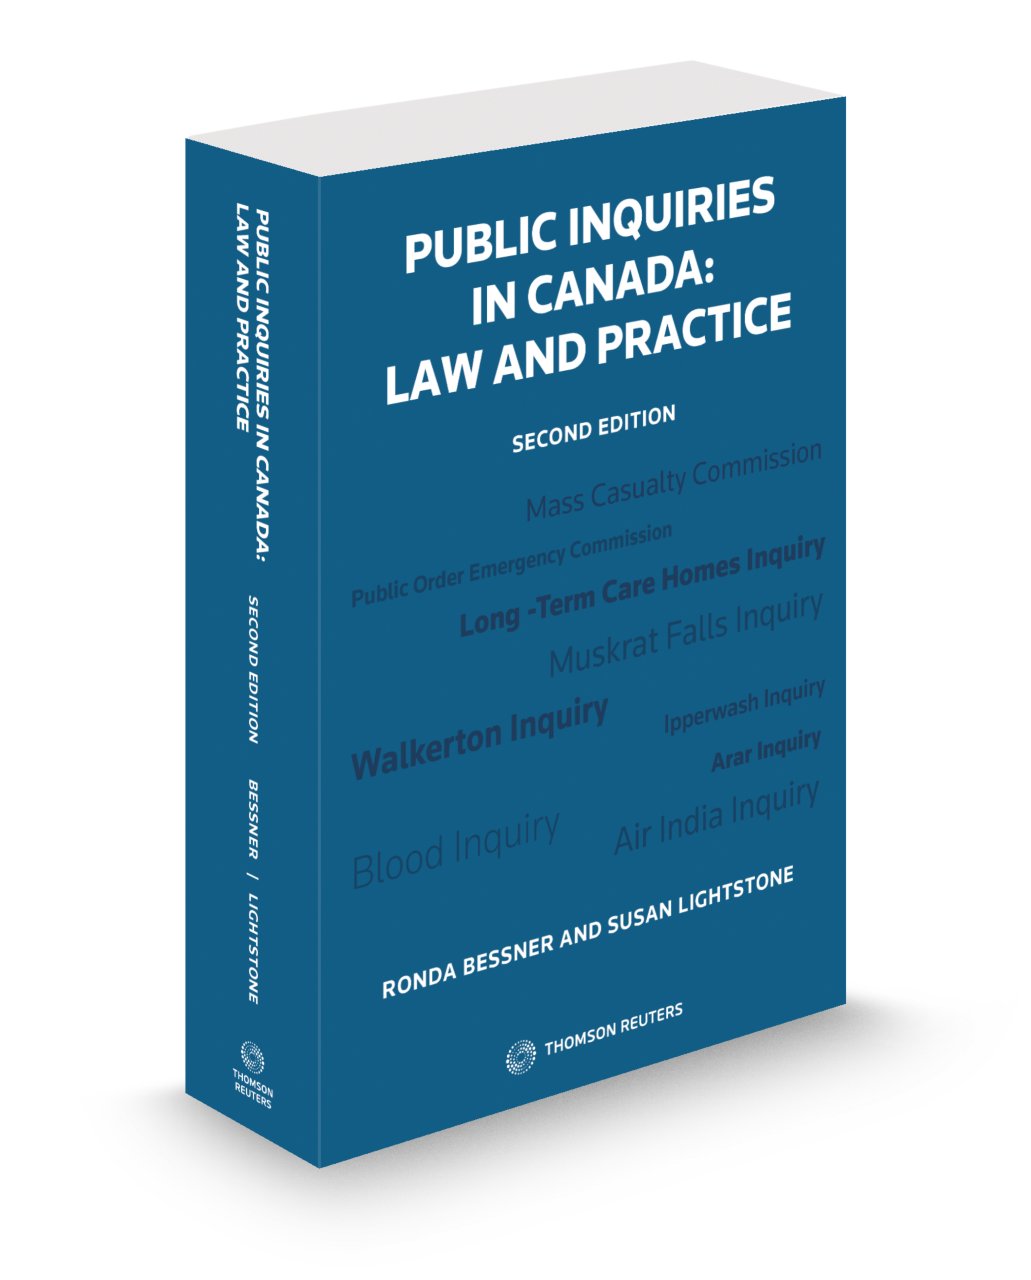 Image of Public Inquiries in Canada: Law and Practice, Second Edition